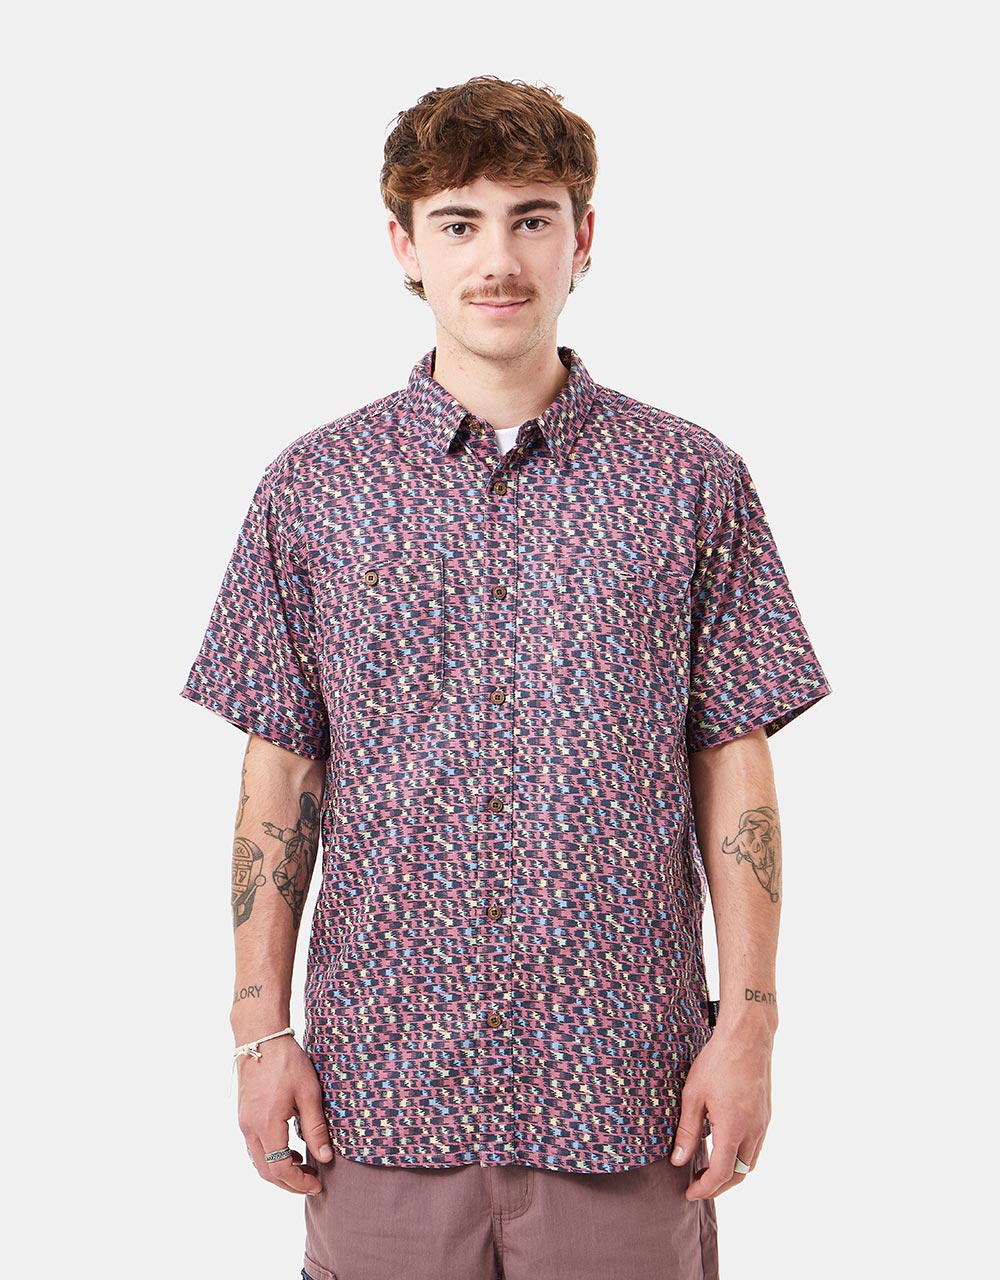 Patagonia Back Step S/S Shirt - Intertwined Hands/Evening Mauve